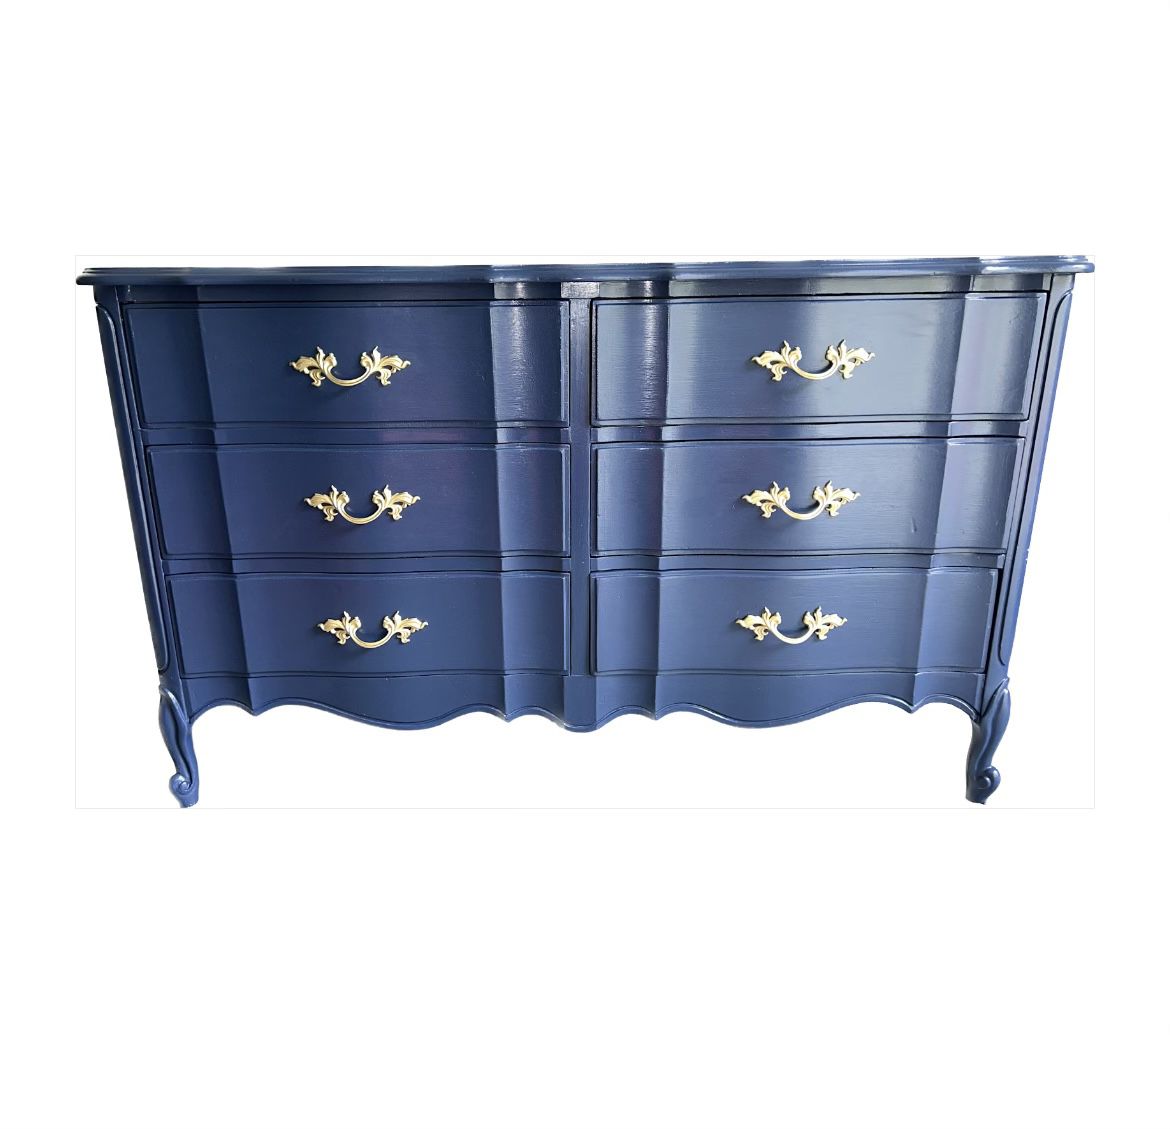 Dixie French provincial dresser and vanity set 